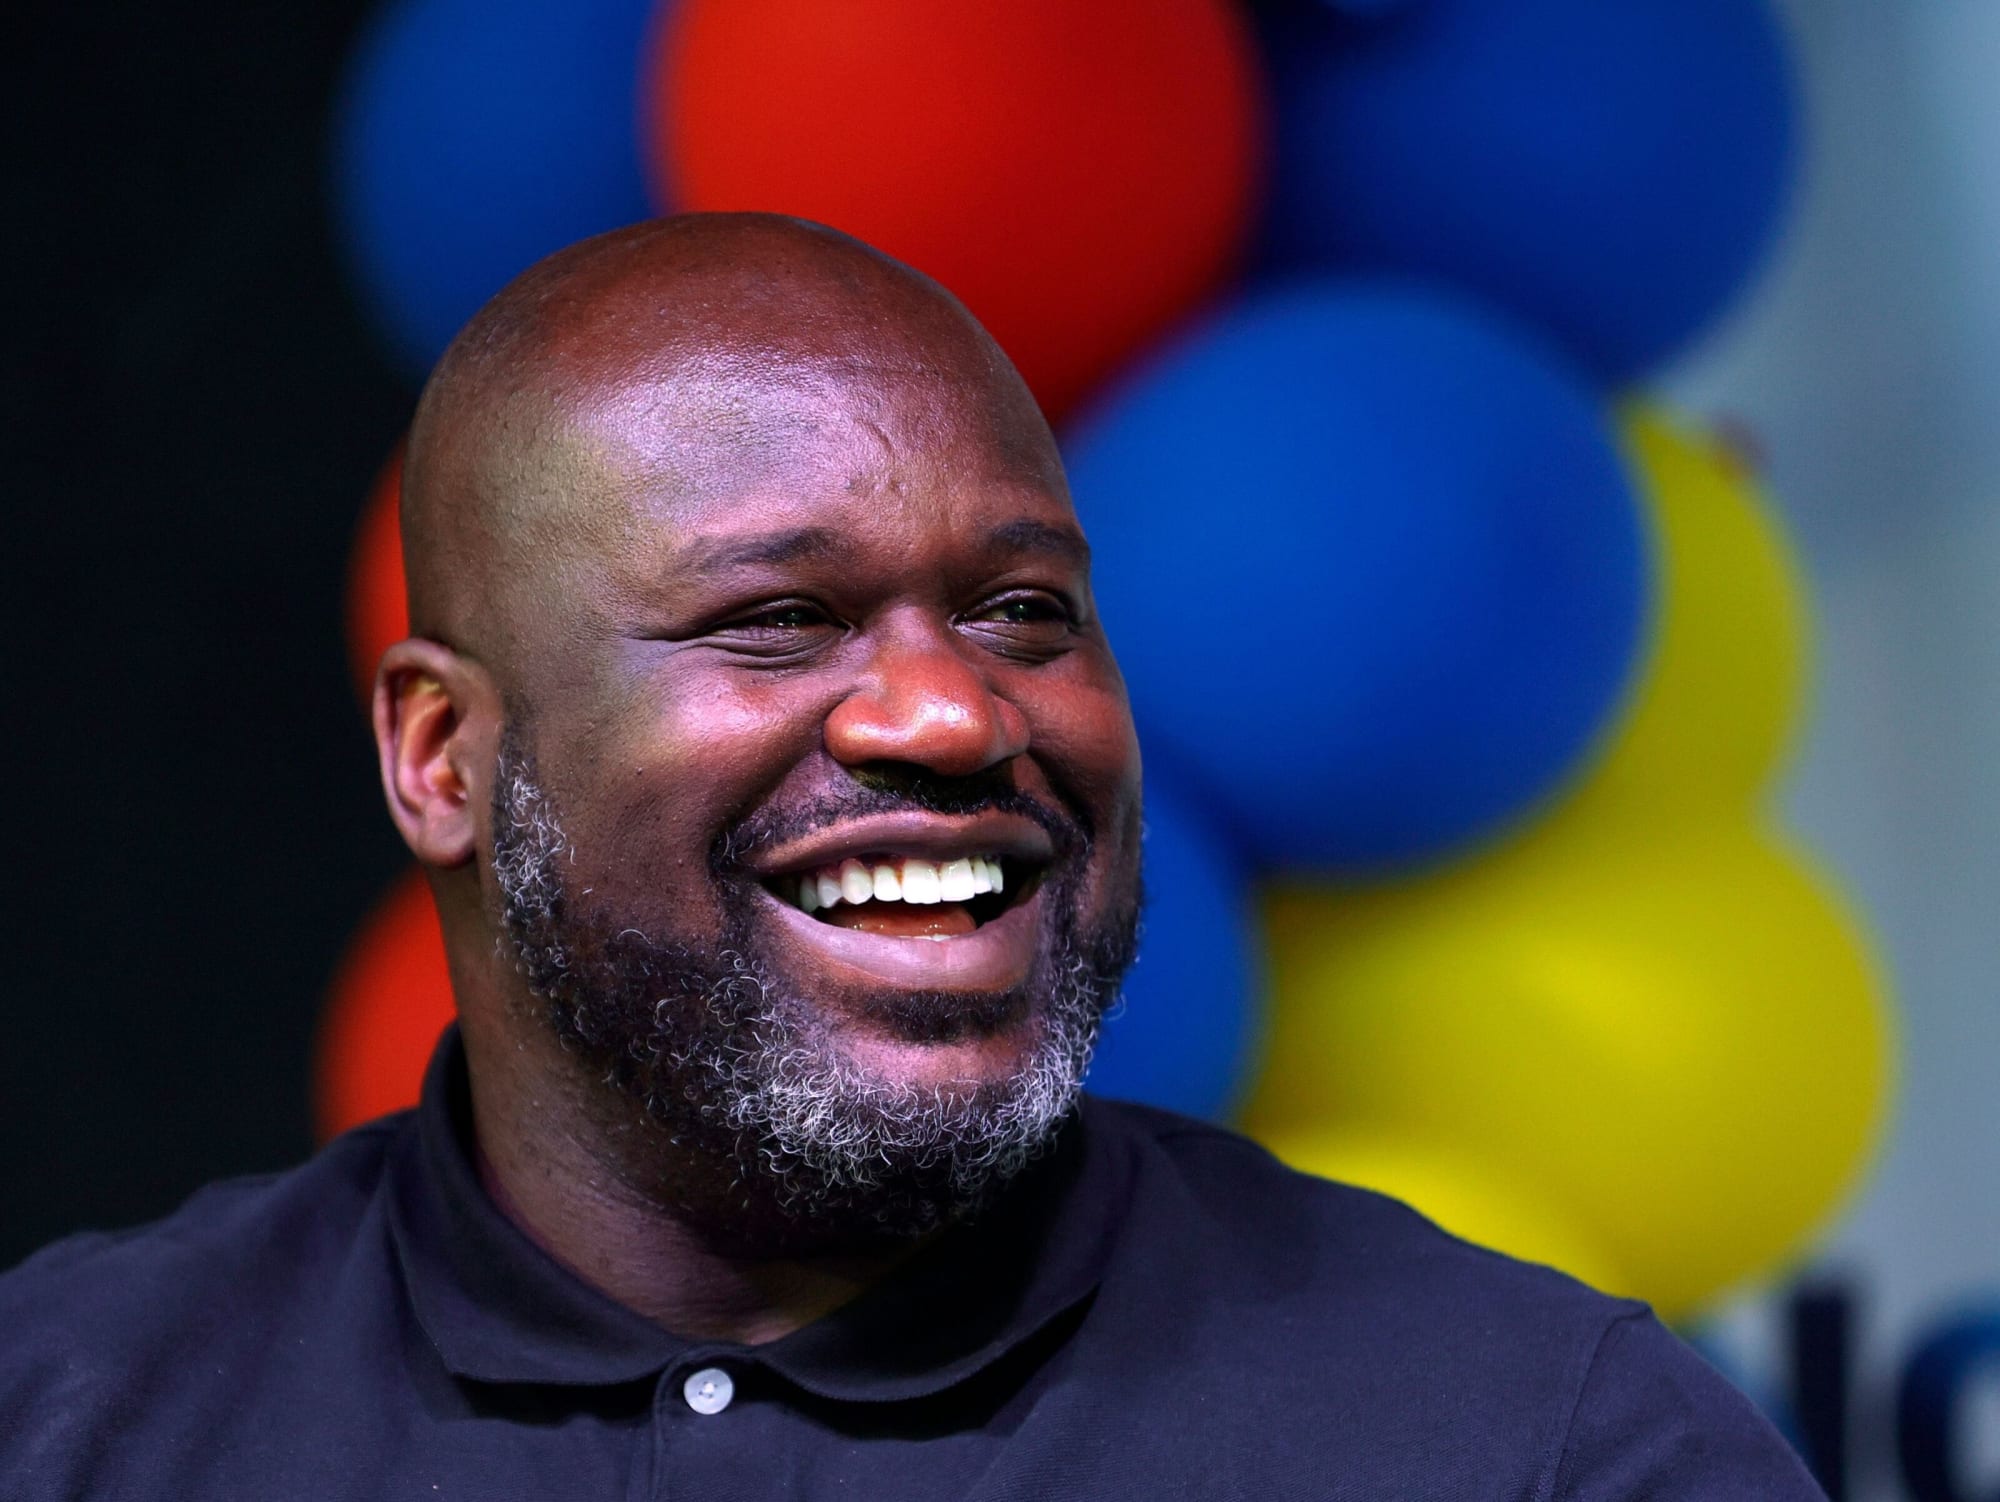 Shaq says there’s ‘an excessive amount of crying’ about NBA refs at the moment